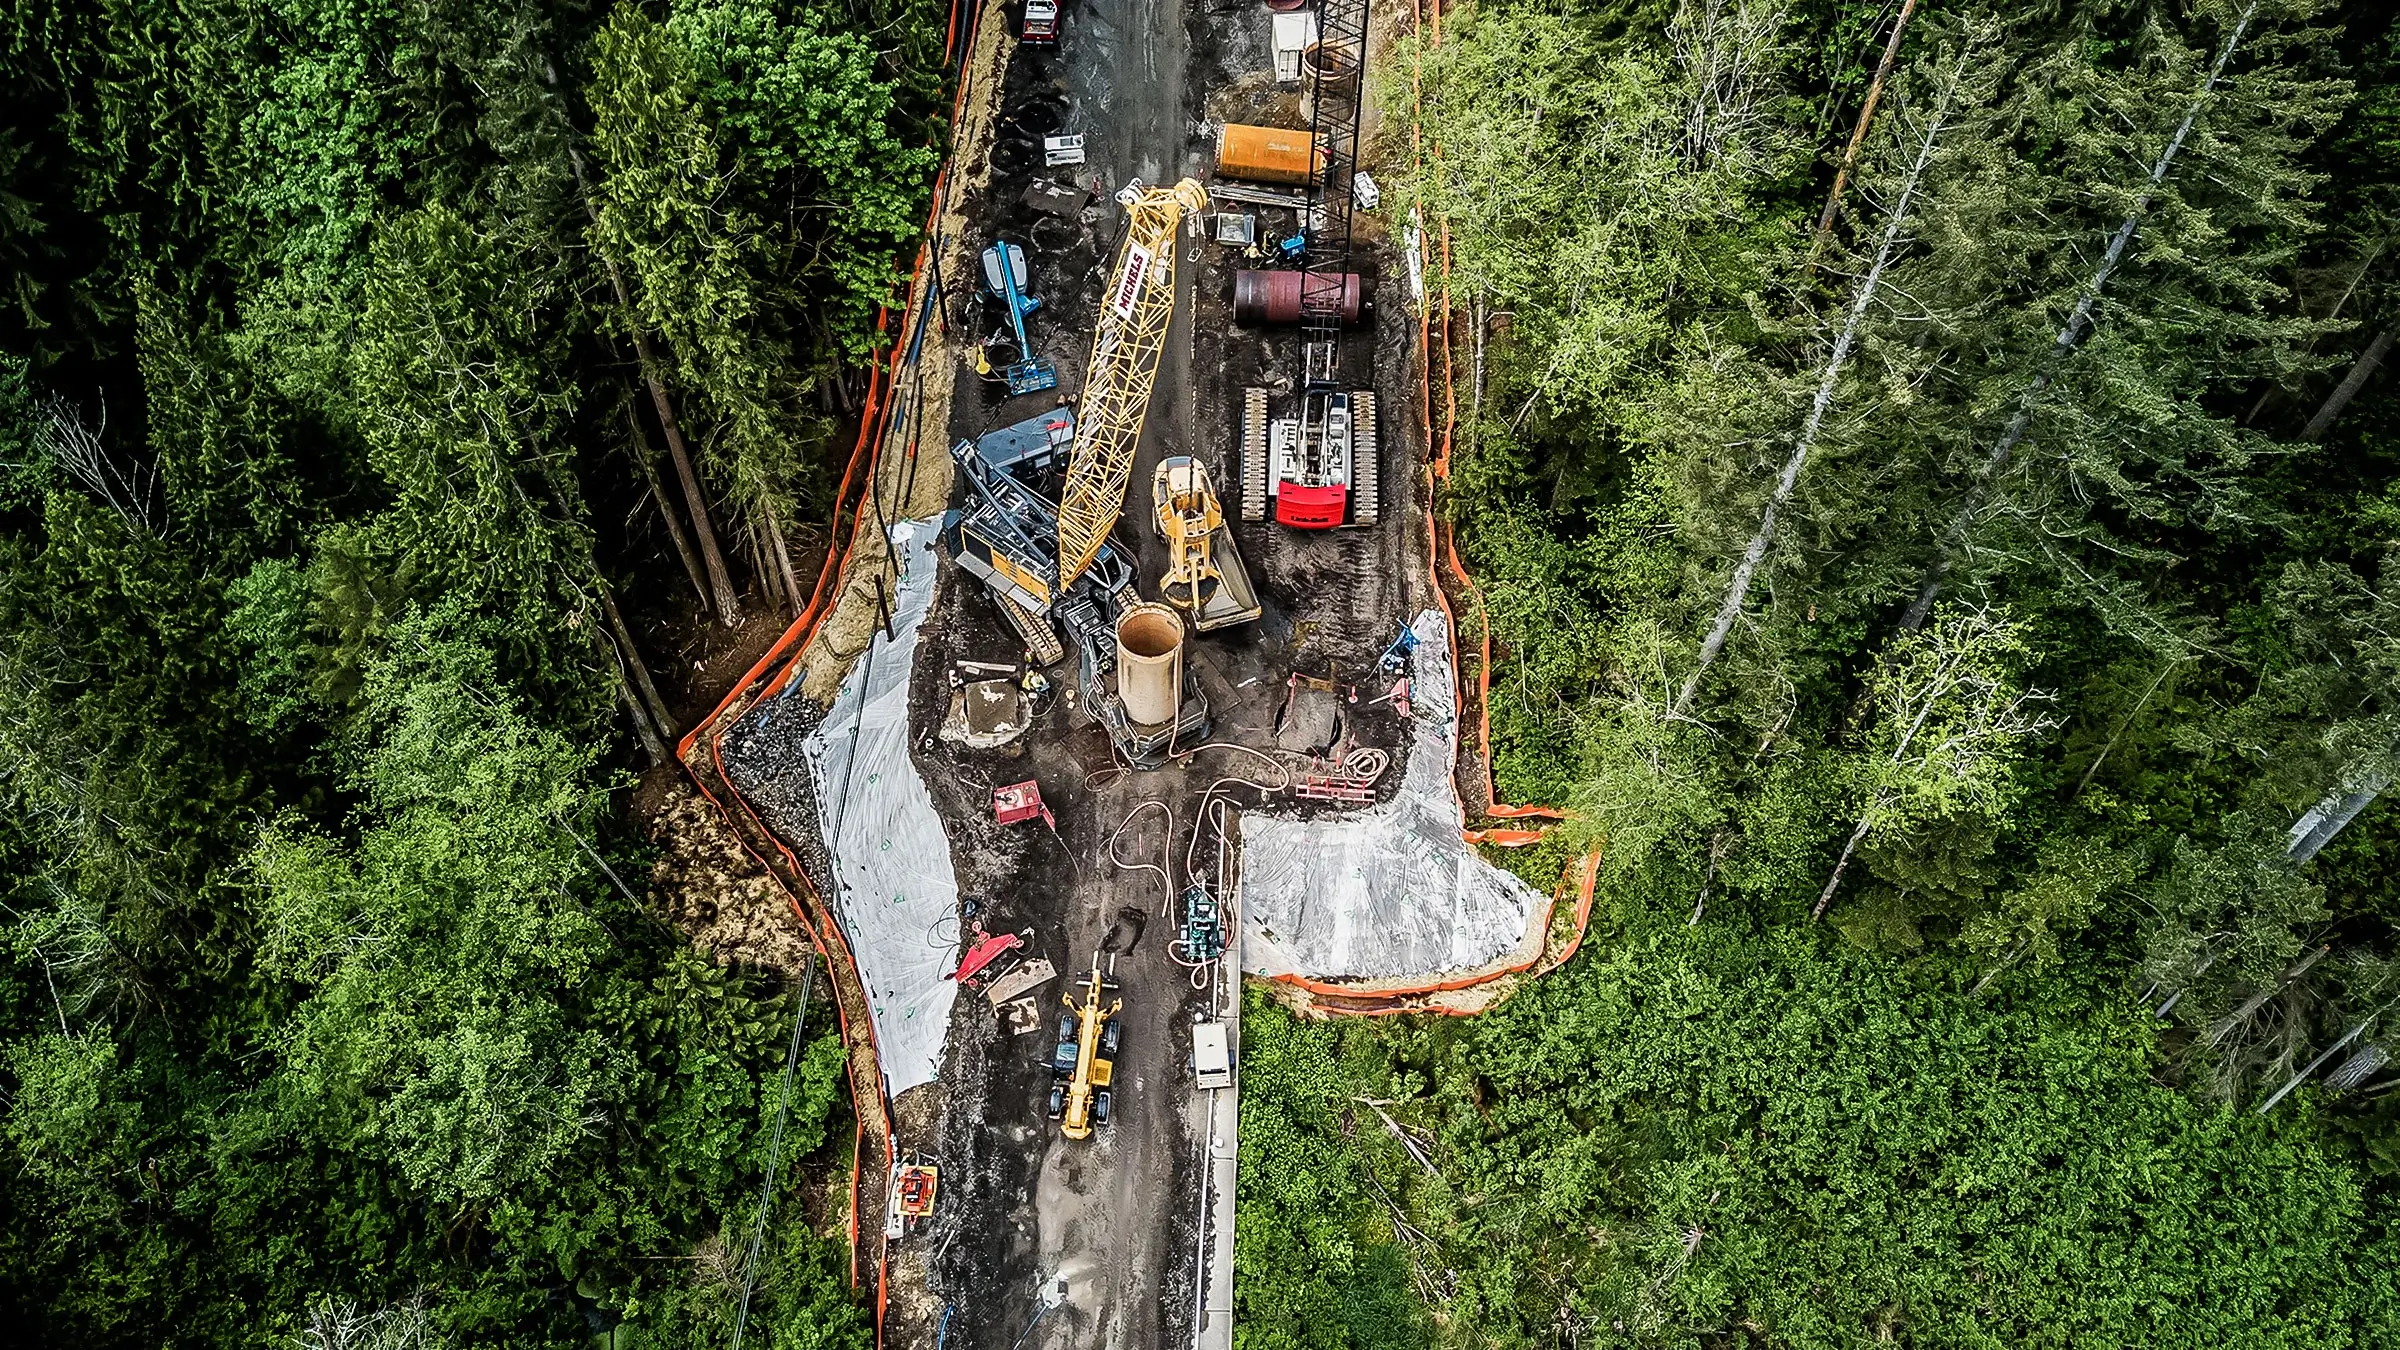 Multiple cranes and other large equipment work on a foundations project in a forest